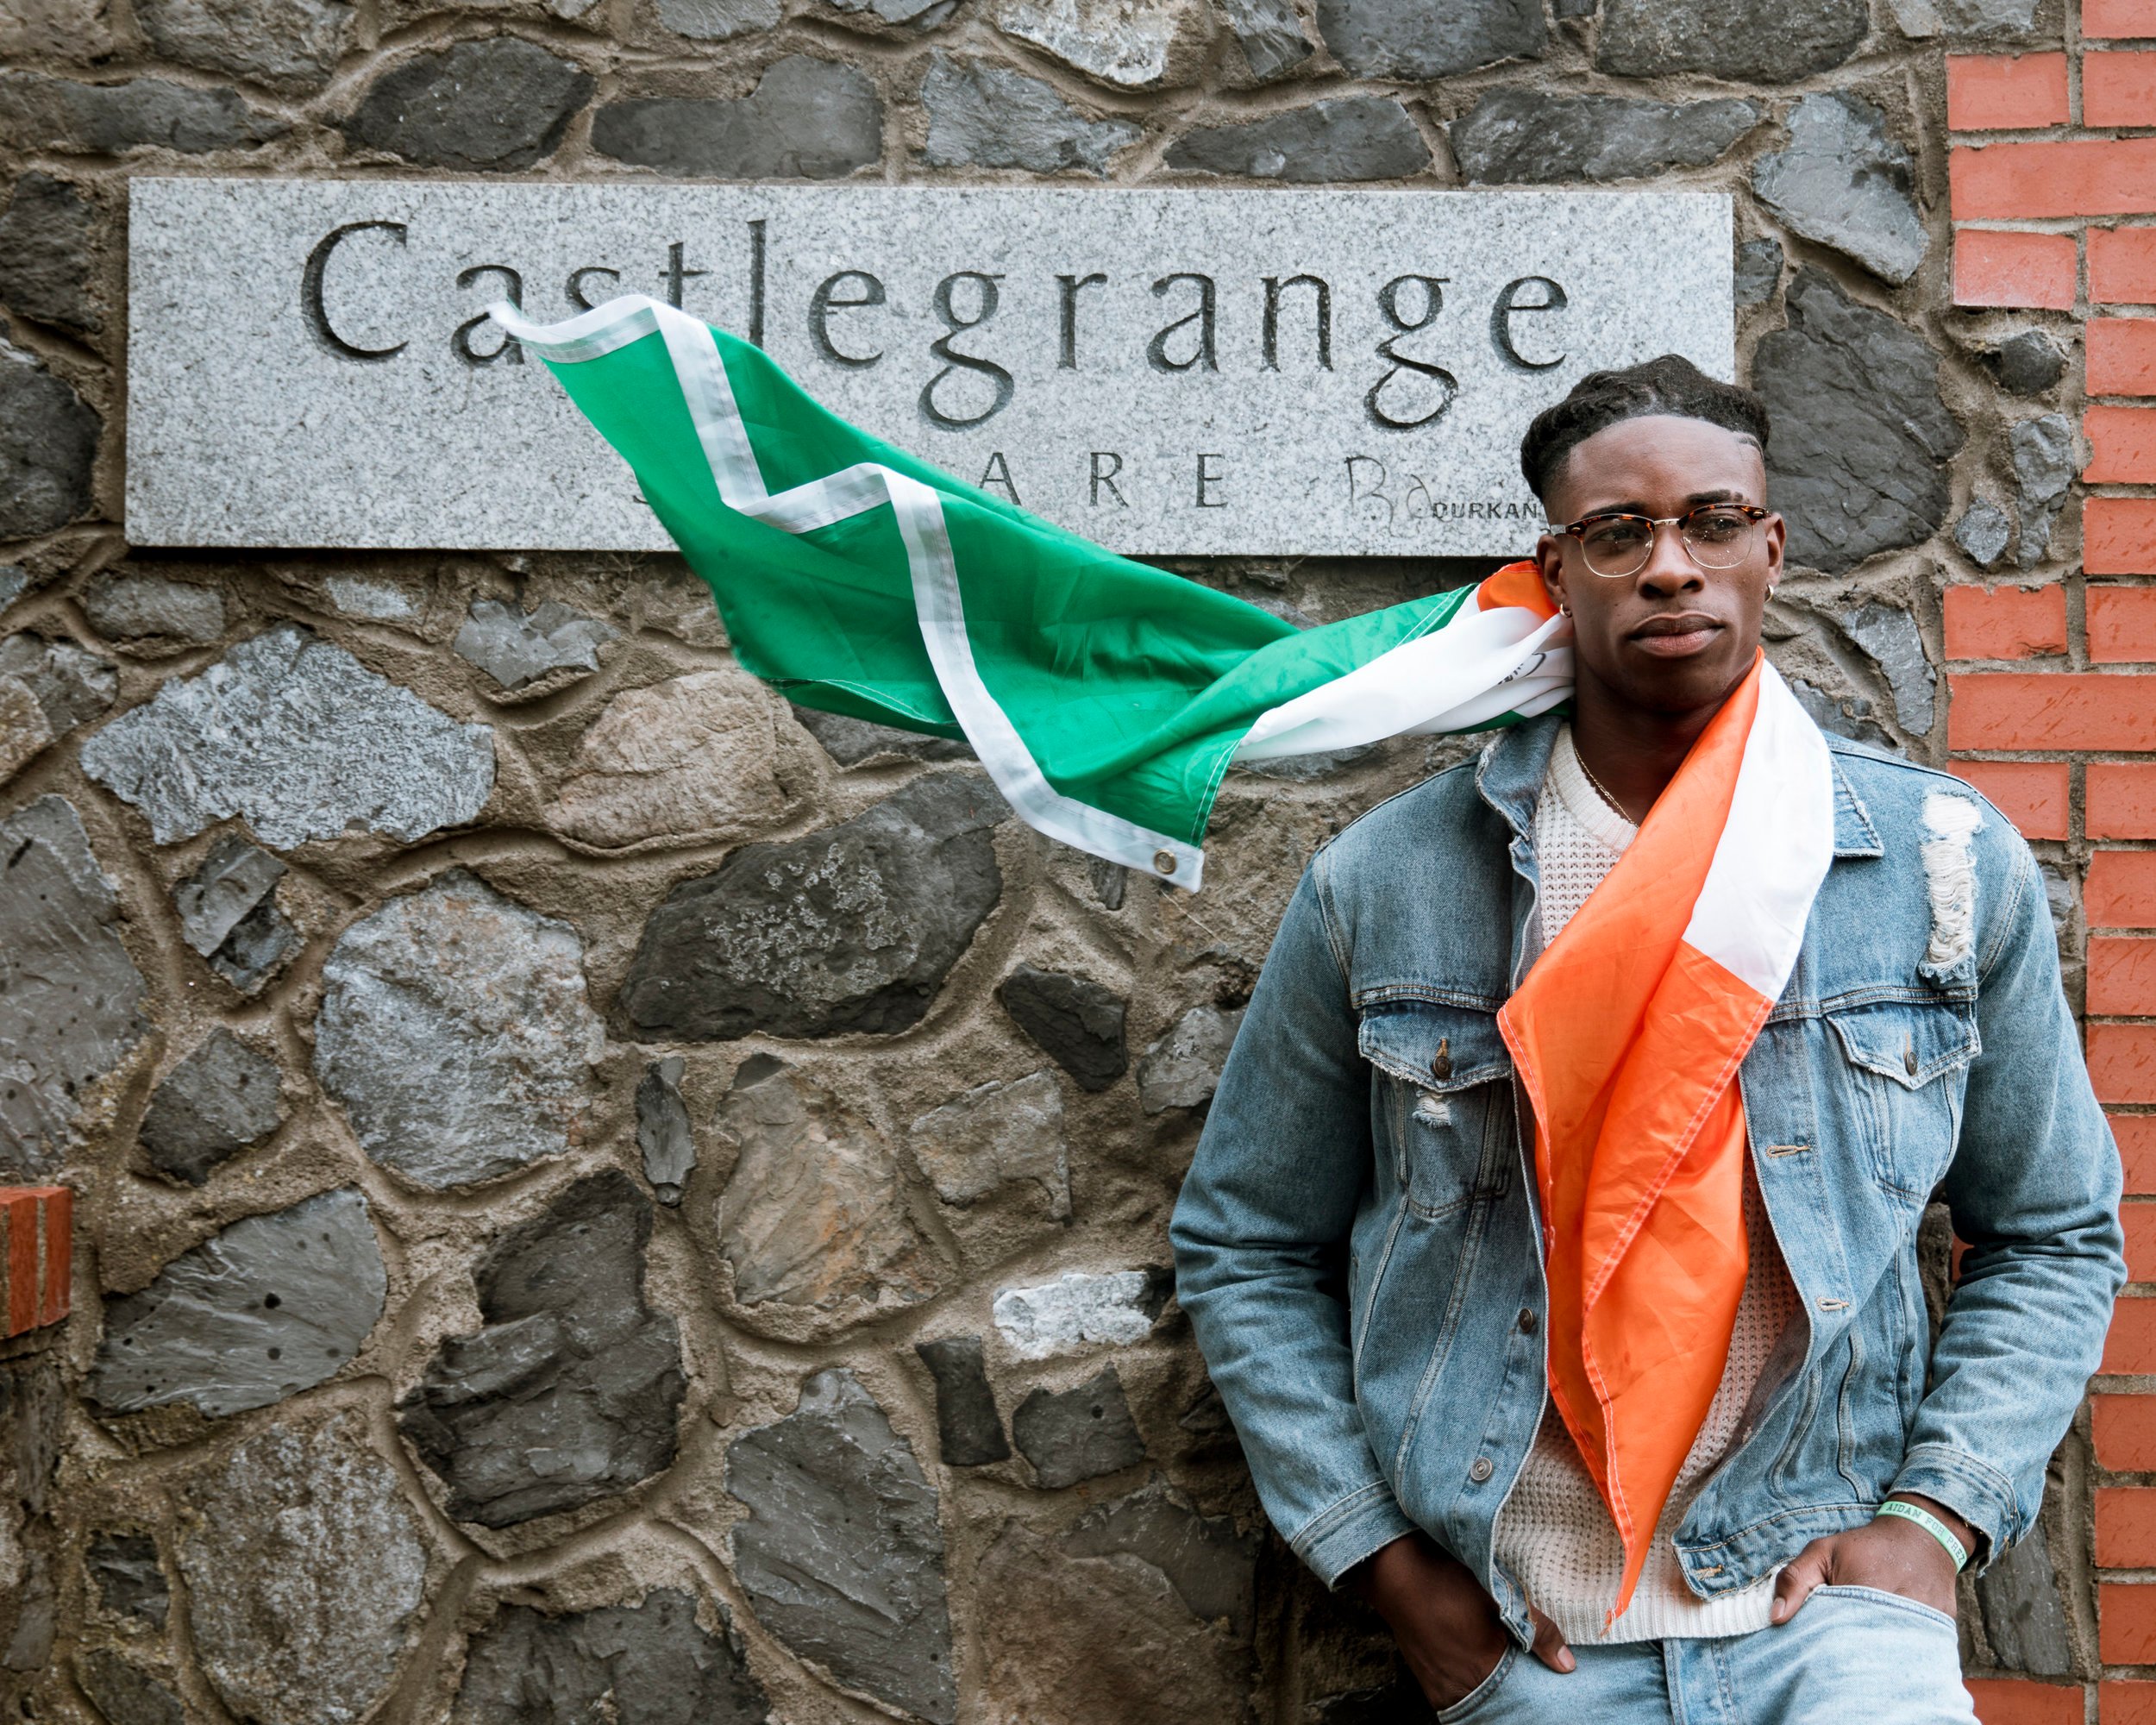 Johnnie Izquierdo stands with the Irish flag draped around his neck in front of a stone wall with a sign reading Castlegrange